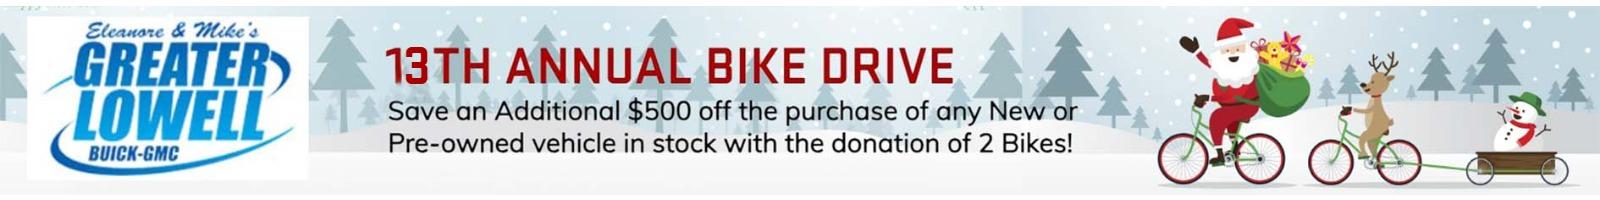 "12th Annual Bike Drive. Save an Additional $500 off the purchase of any New or Pre-owned vehicle in stock with the donation of 2 Bikes!"